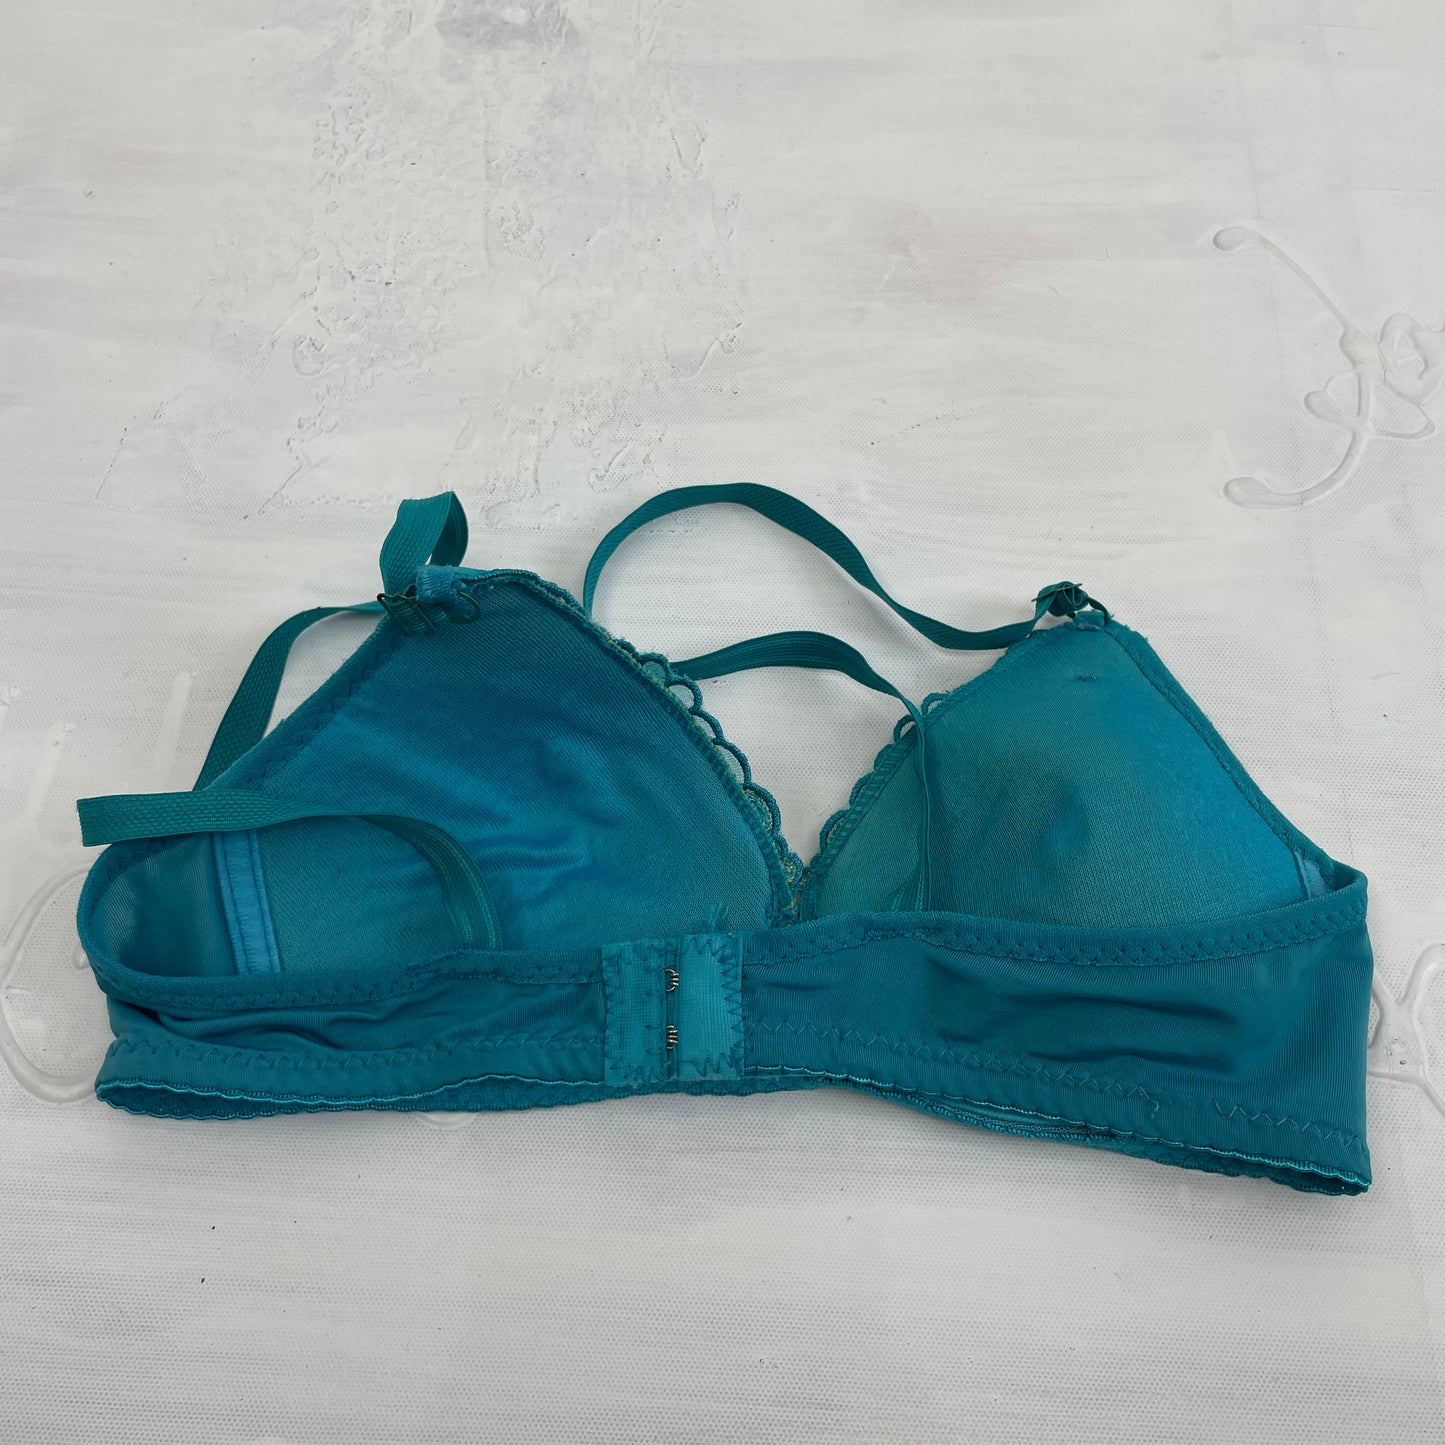 LIGHT ACADEMIA DROP | small blue embroidered bra